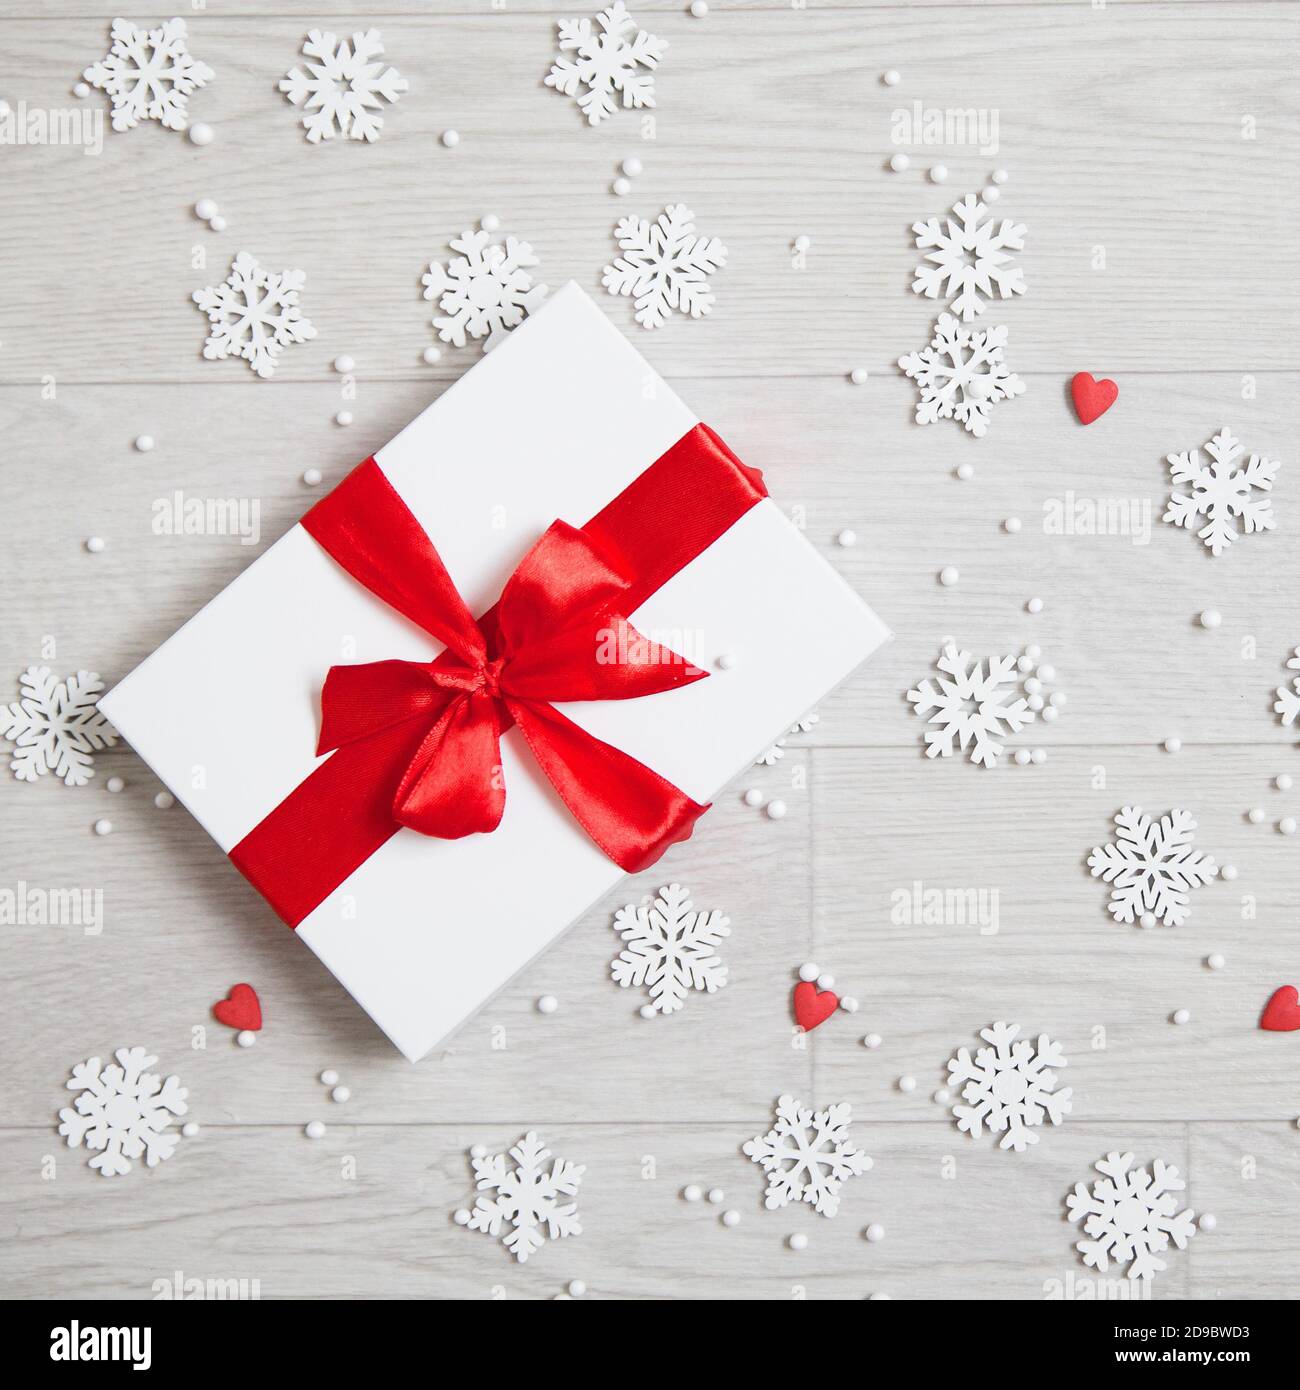 Gift with a red bow and snowflakes. New Year's gift. White box with red ribbon. Stock Photo